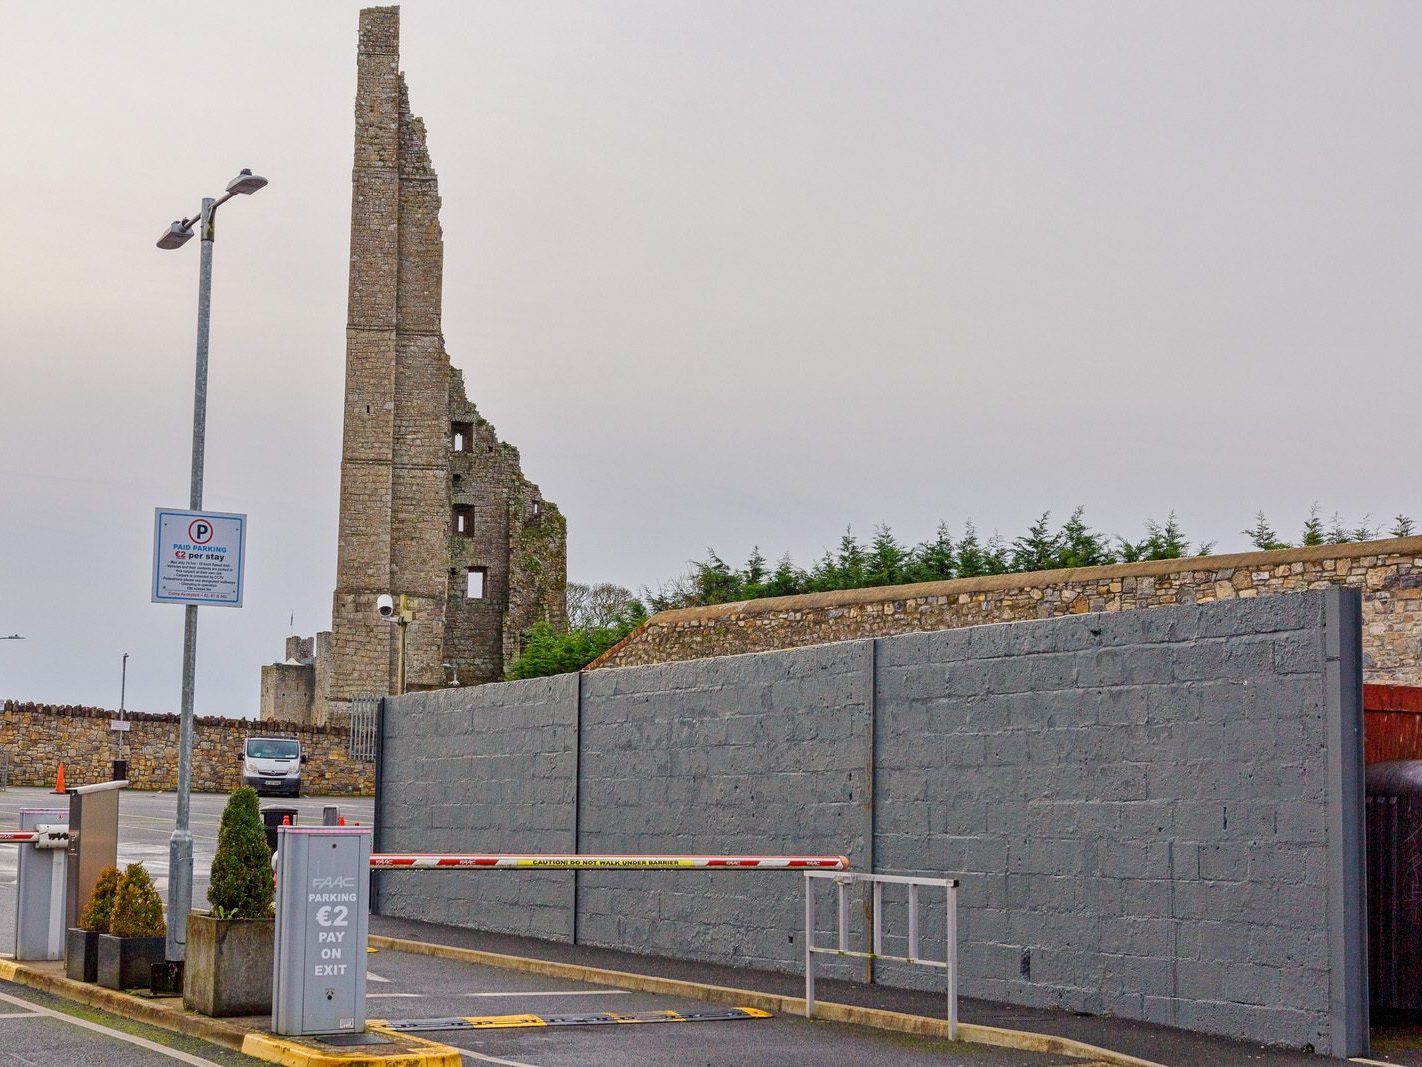 THE YELLOW STEEPLE DOMINATES THE TOWN OF TRIM [ALSO KNOWN AS ST MARYS ABBEY]-226757-1